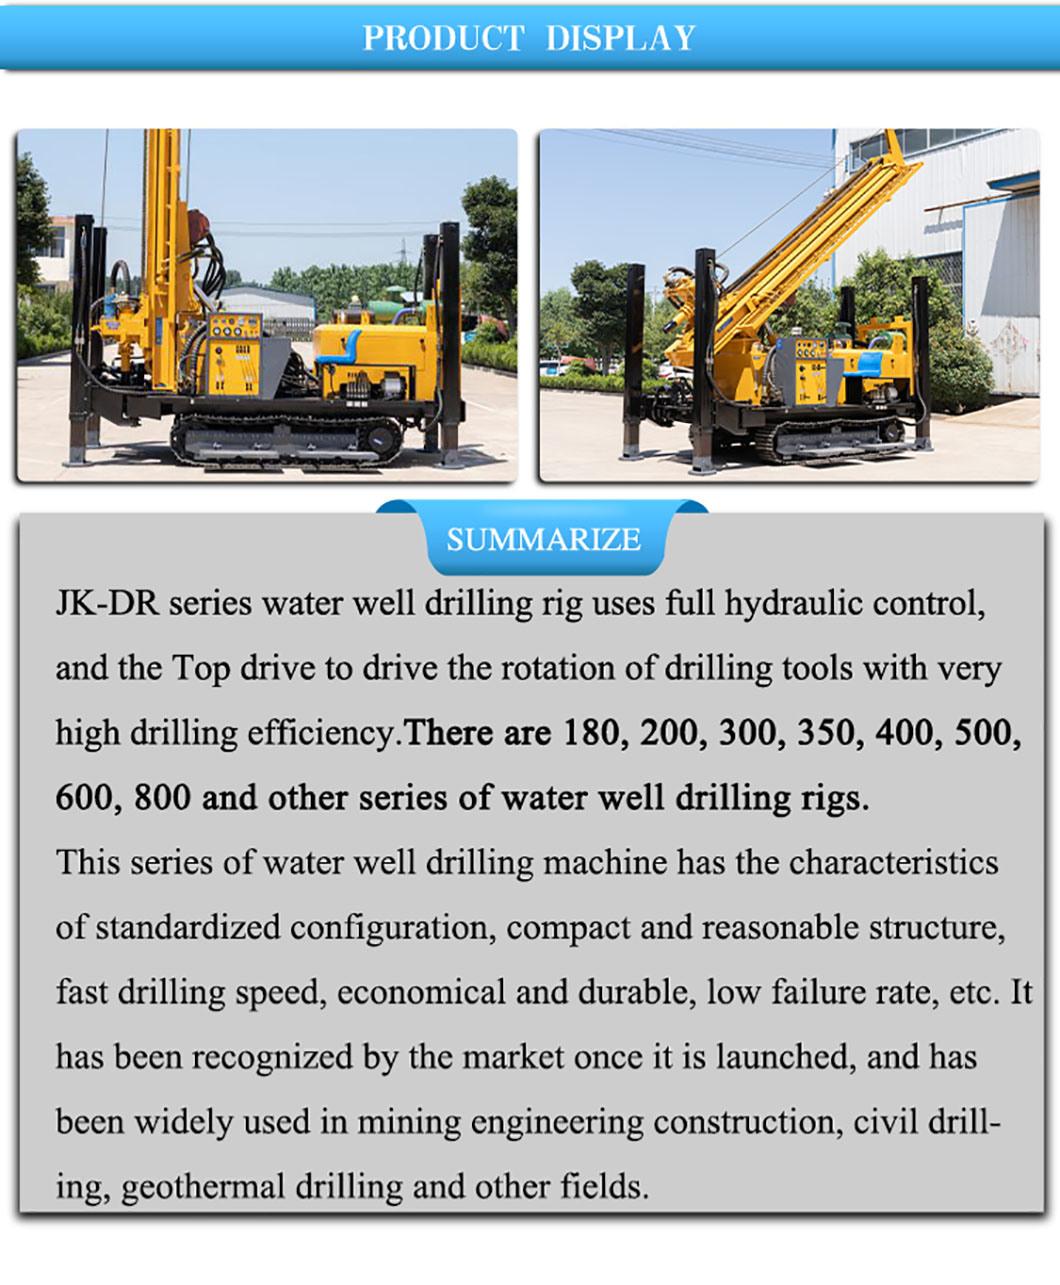 Jk-Dr500 Crawler Type Water Well Drilling Rig Machine for Sale